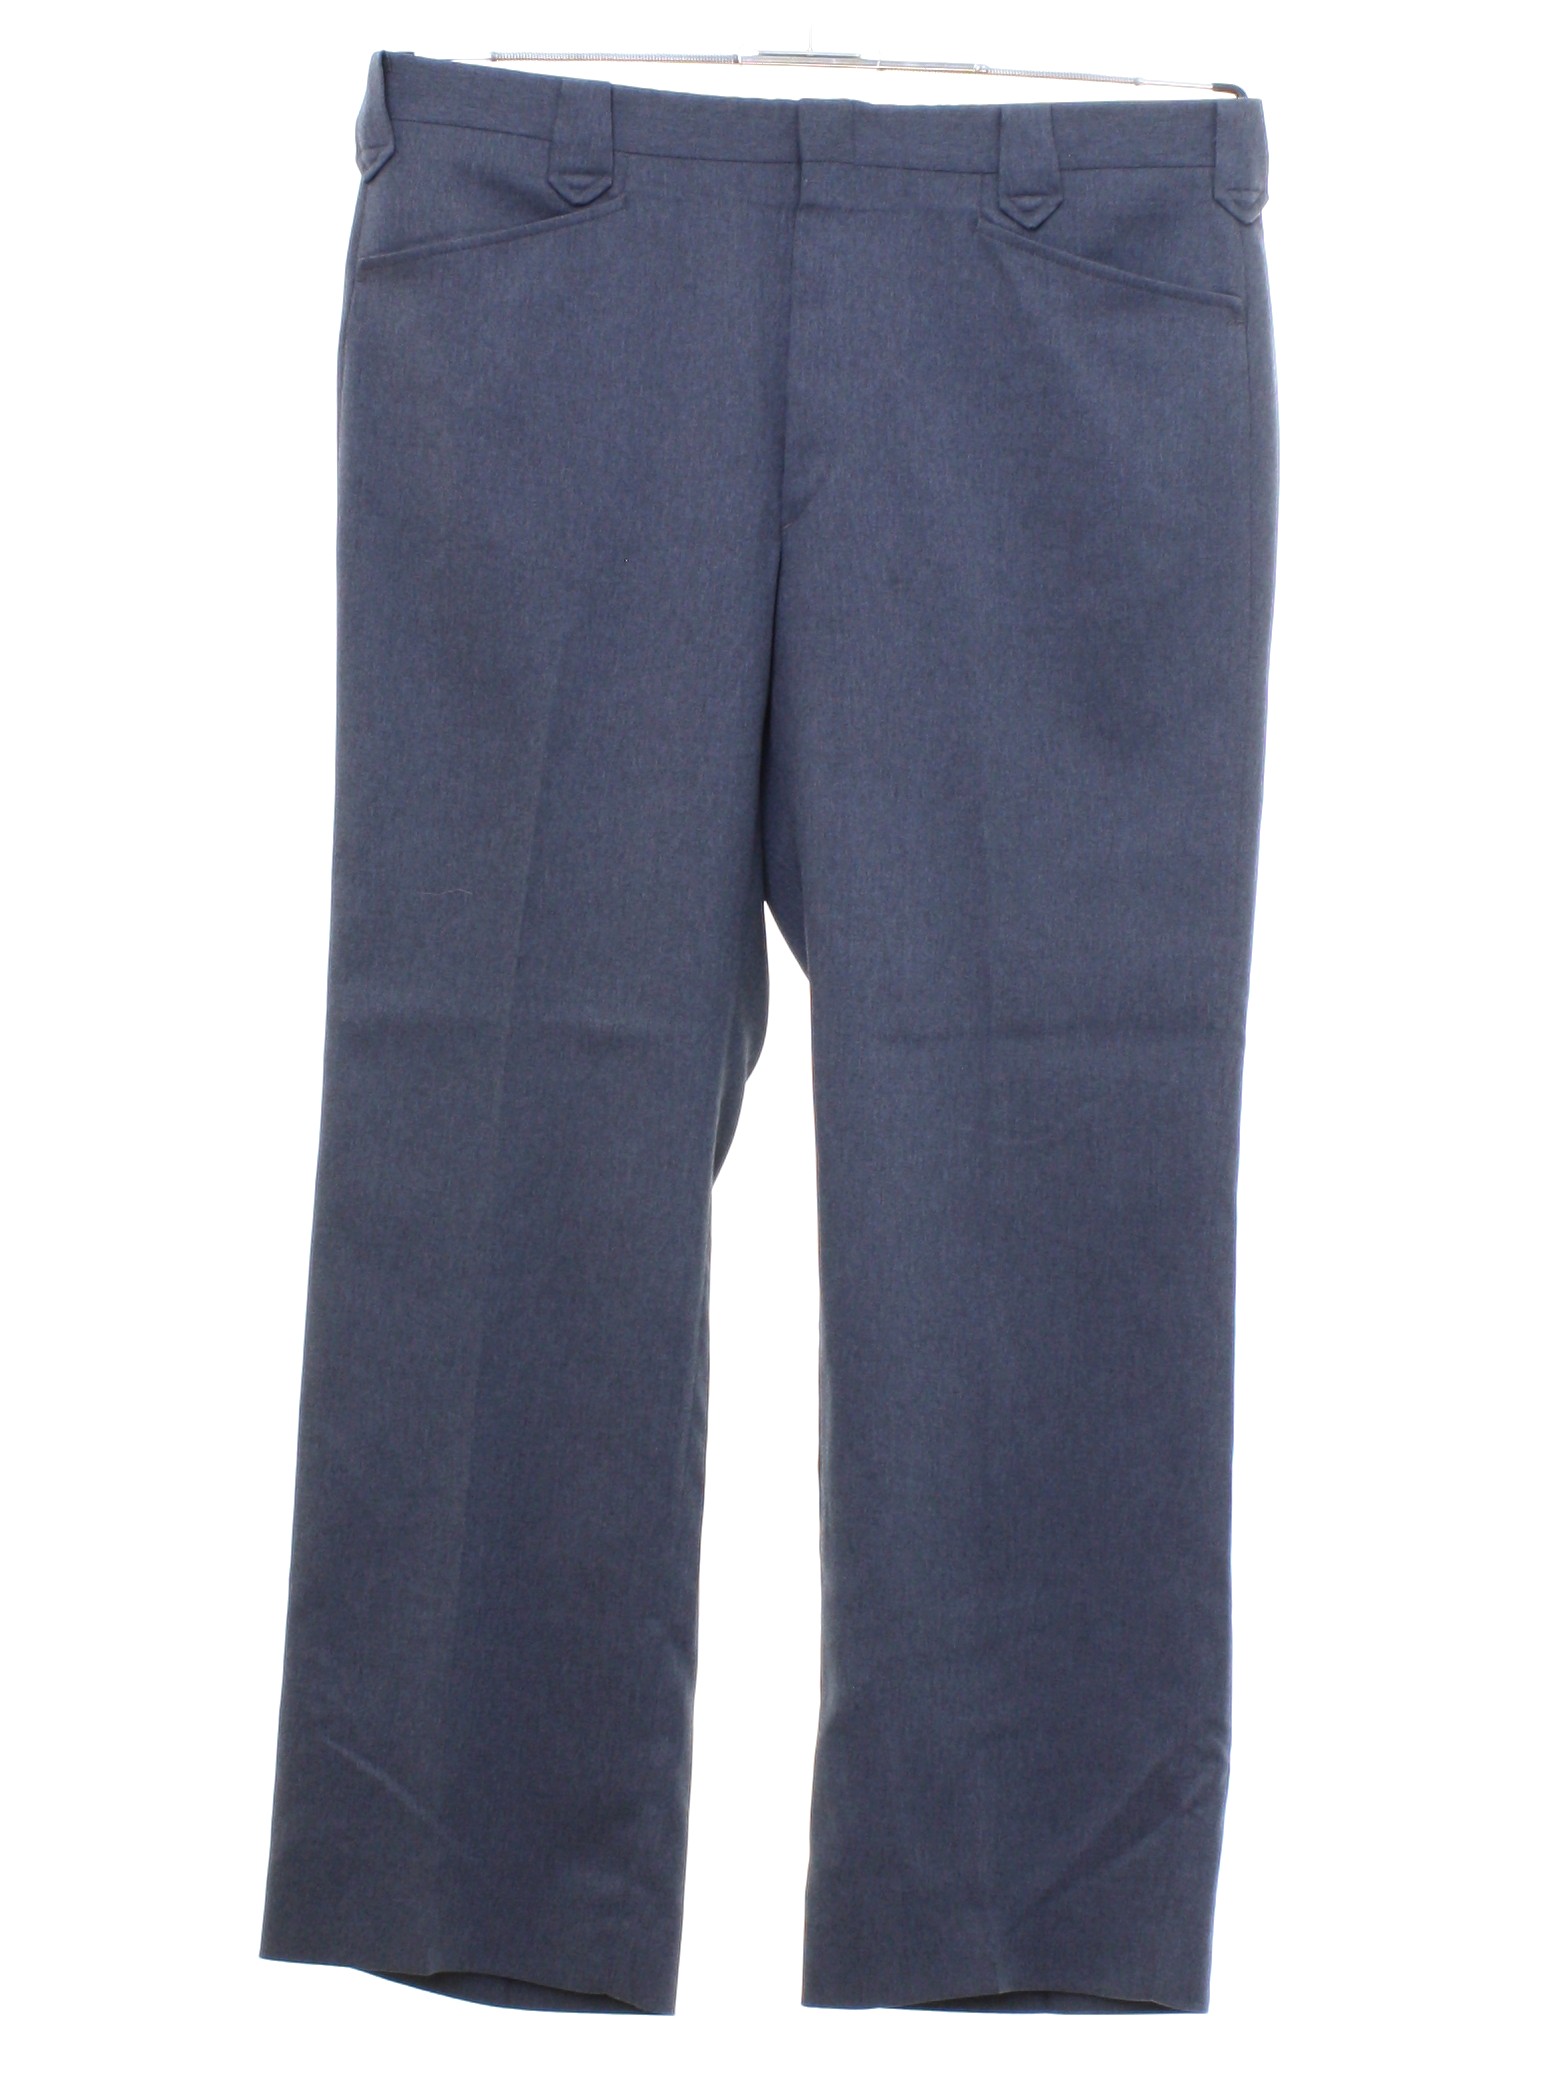 70s Vintage Pants: 70s -No Label- Mens gray solid colored polyester ...